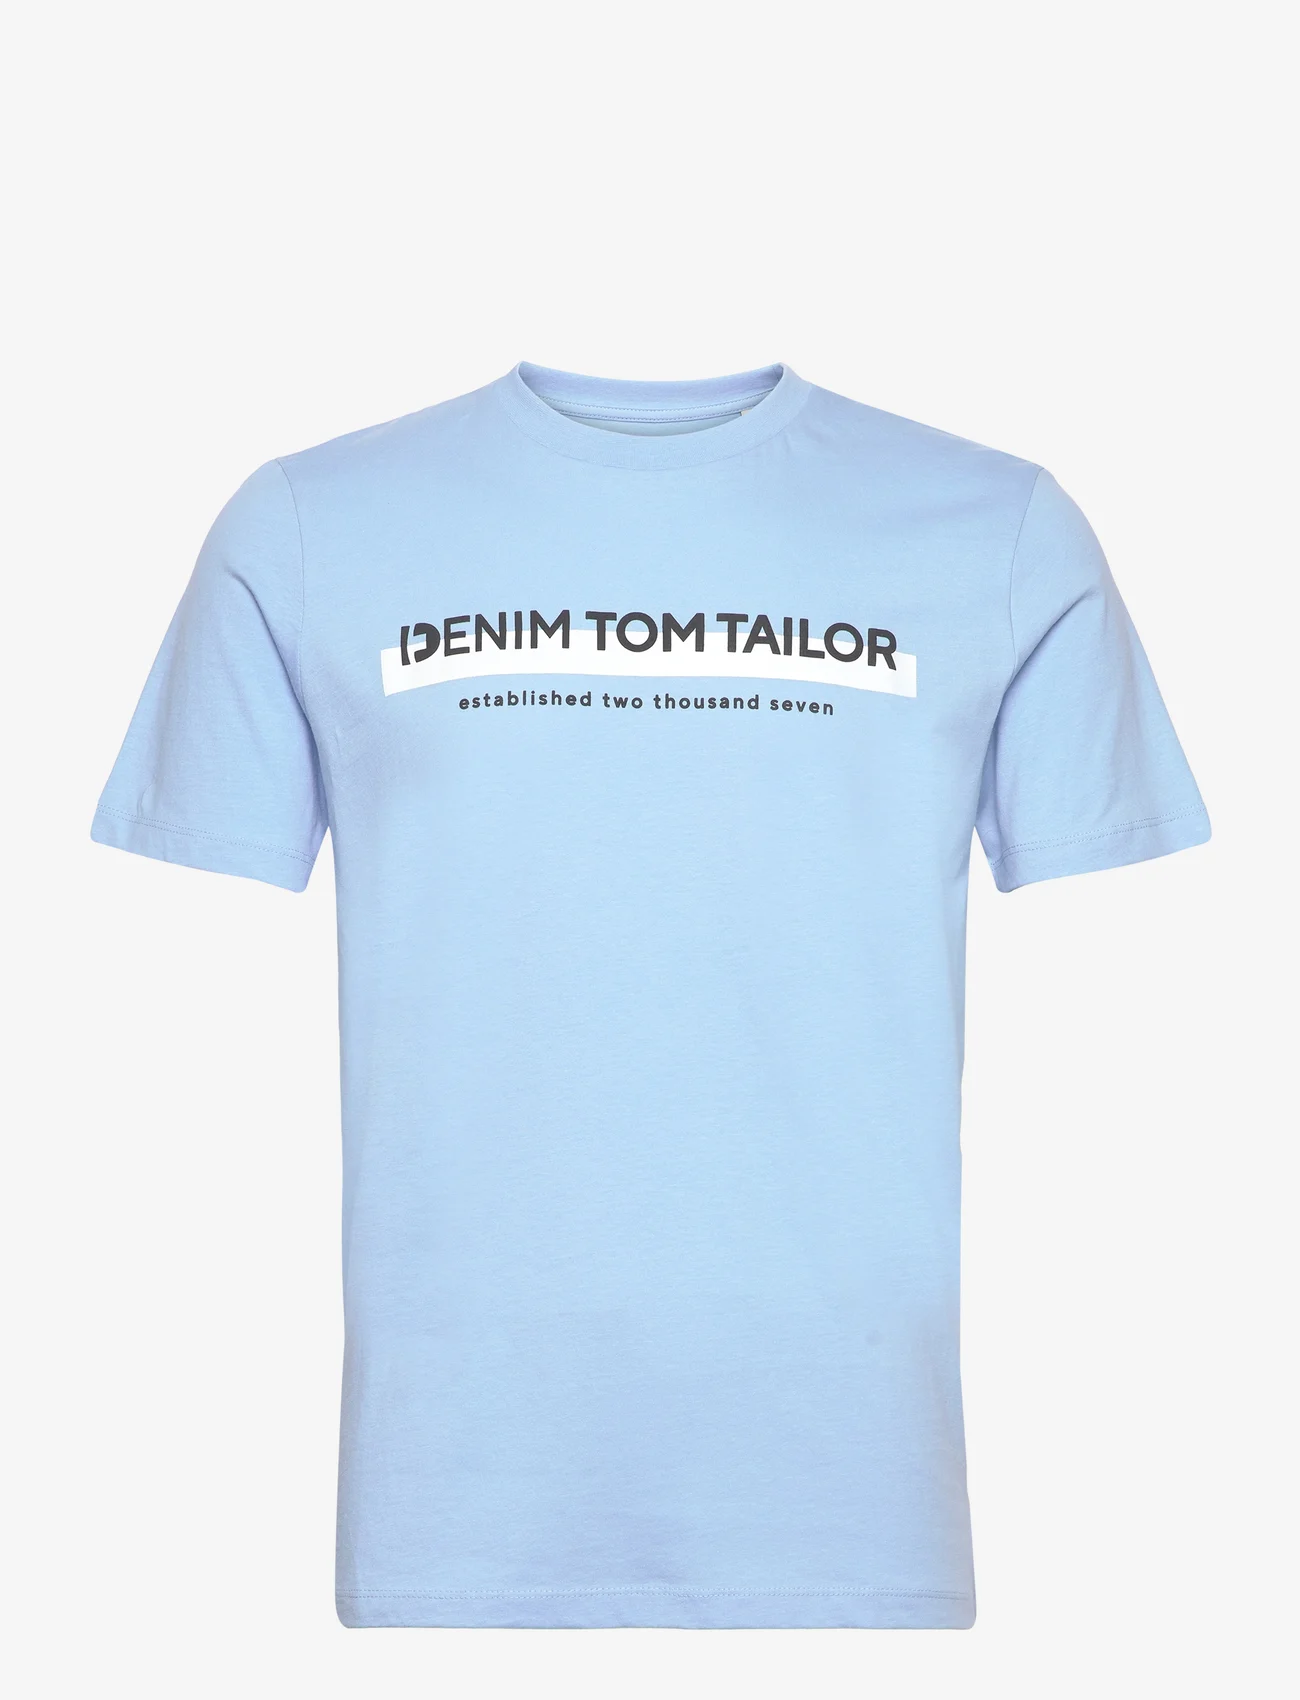 Tom Tailor - printed t-shirt - die niedrigsten preise - washed out middle blue - 0